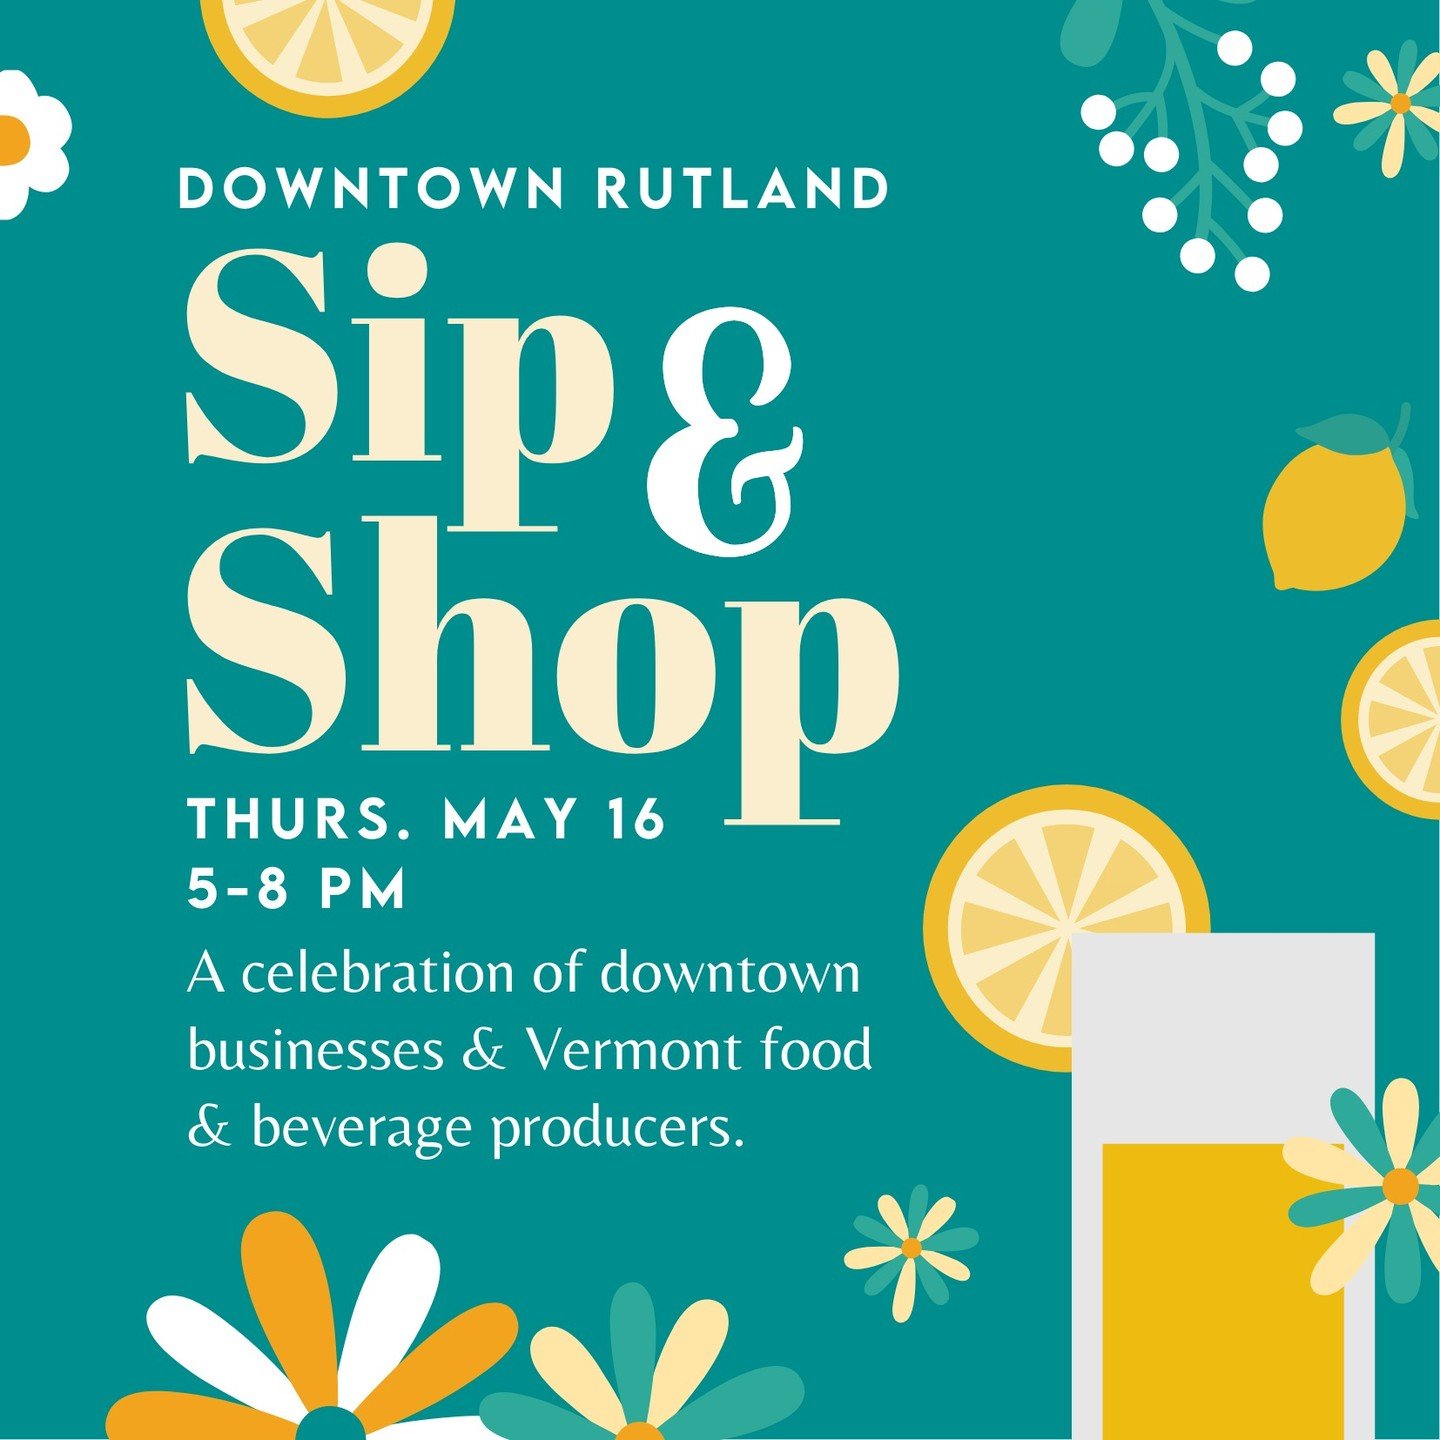 Join us for the Downtown Rutland Sip &amp; Shop on Thursday, May 16, from 5-8 pm! Sample food and beverages from Vermont producers while shopping in the heart of our historic downtown. Attendees will be able to meet up with friends at participating l